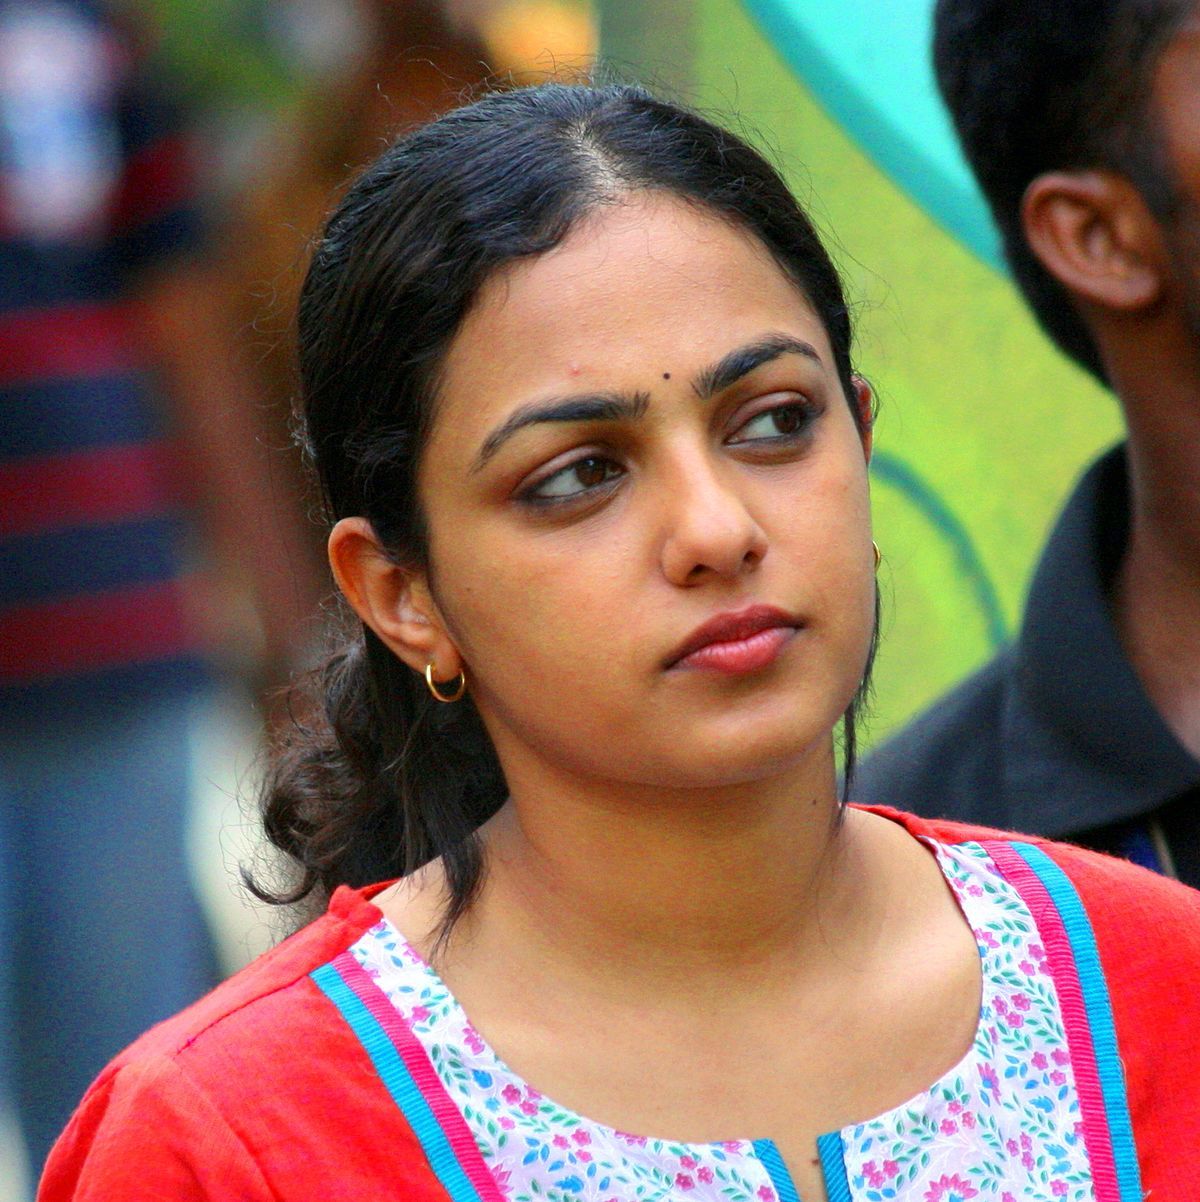 Mollywood Director V K Prakash To Rope In Nithya Menen For His Next Directorial